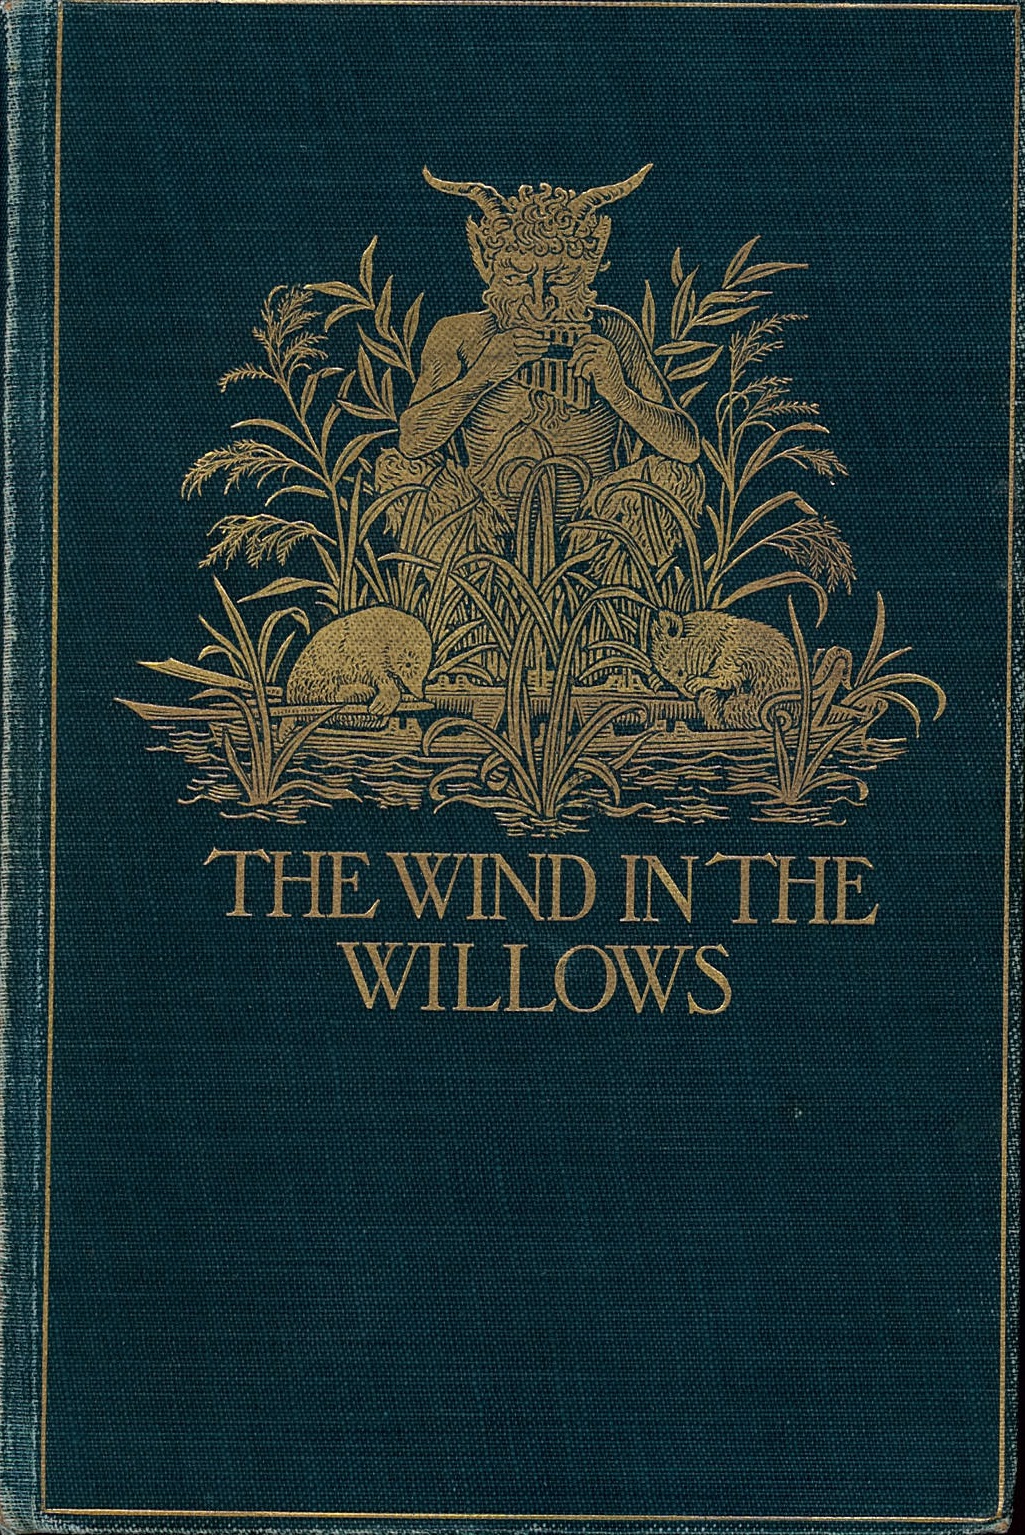 Cover of Wind in the Willows